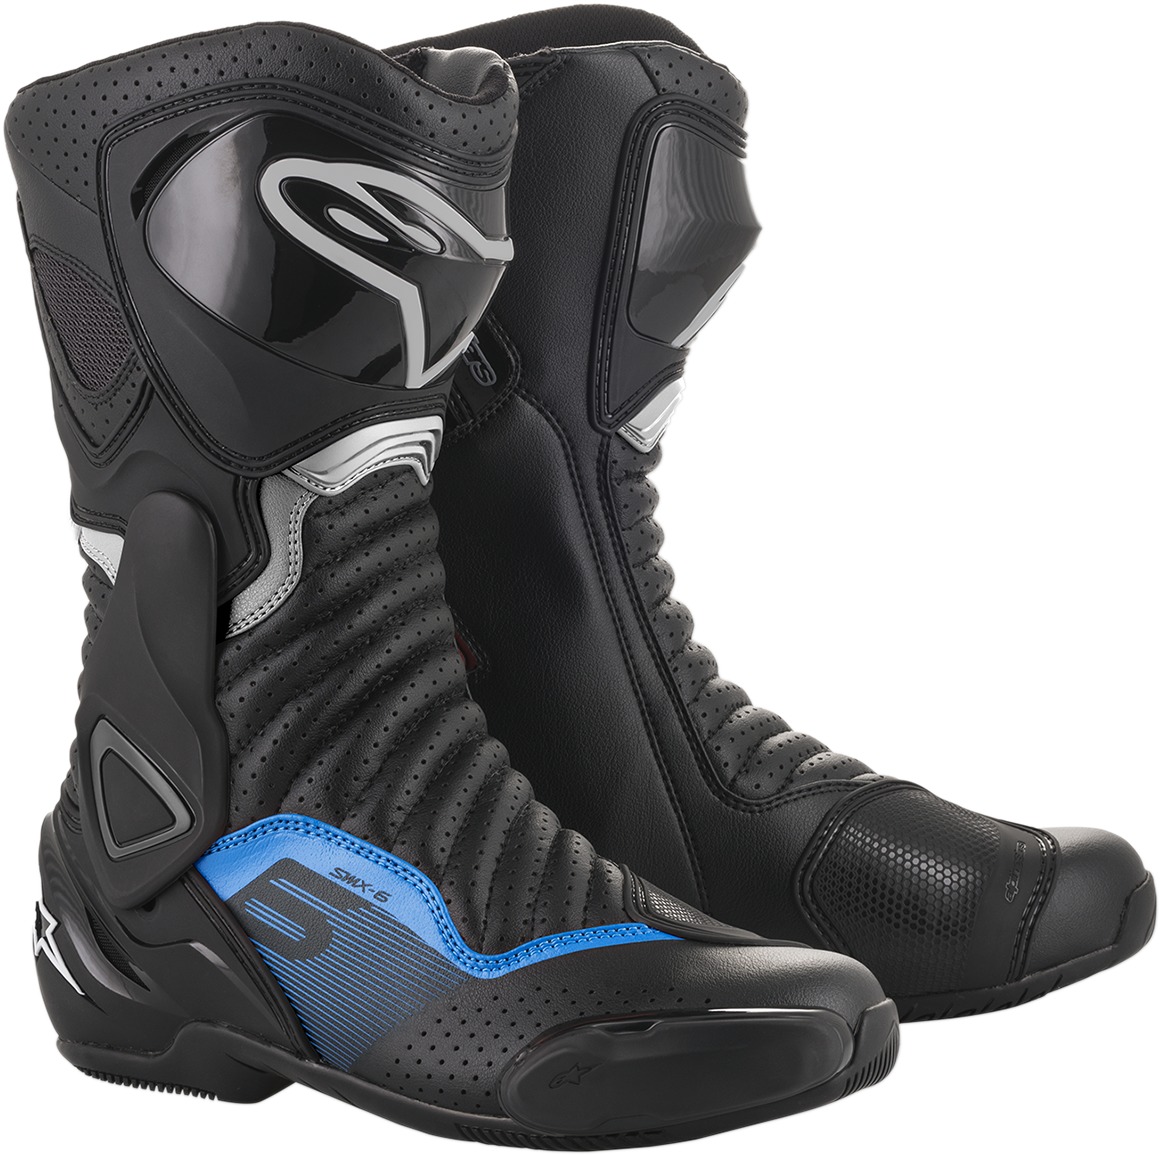 SMX-6 v2 Street Riding Boots Black/Blue/Gray/White US 12.5 - Click Image to Close